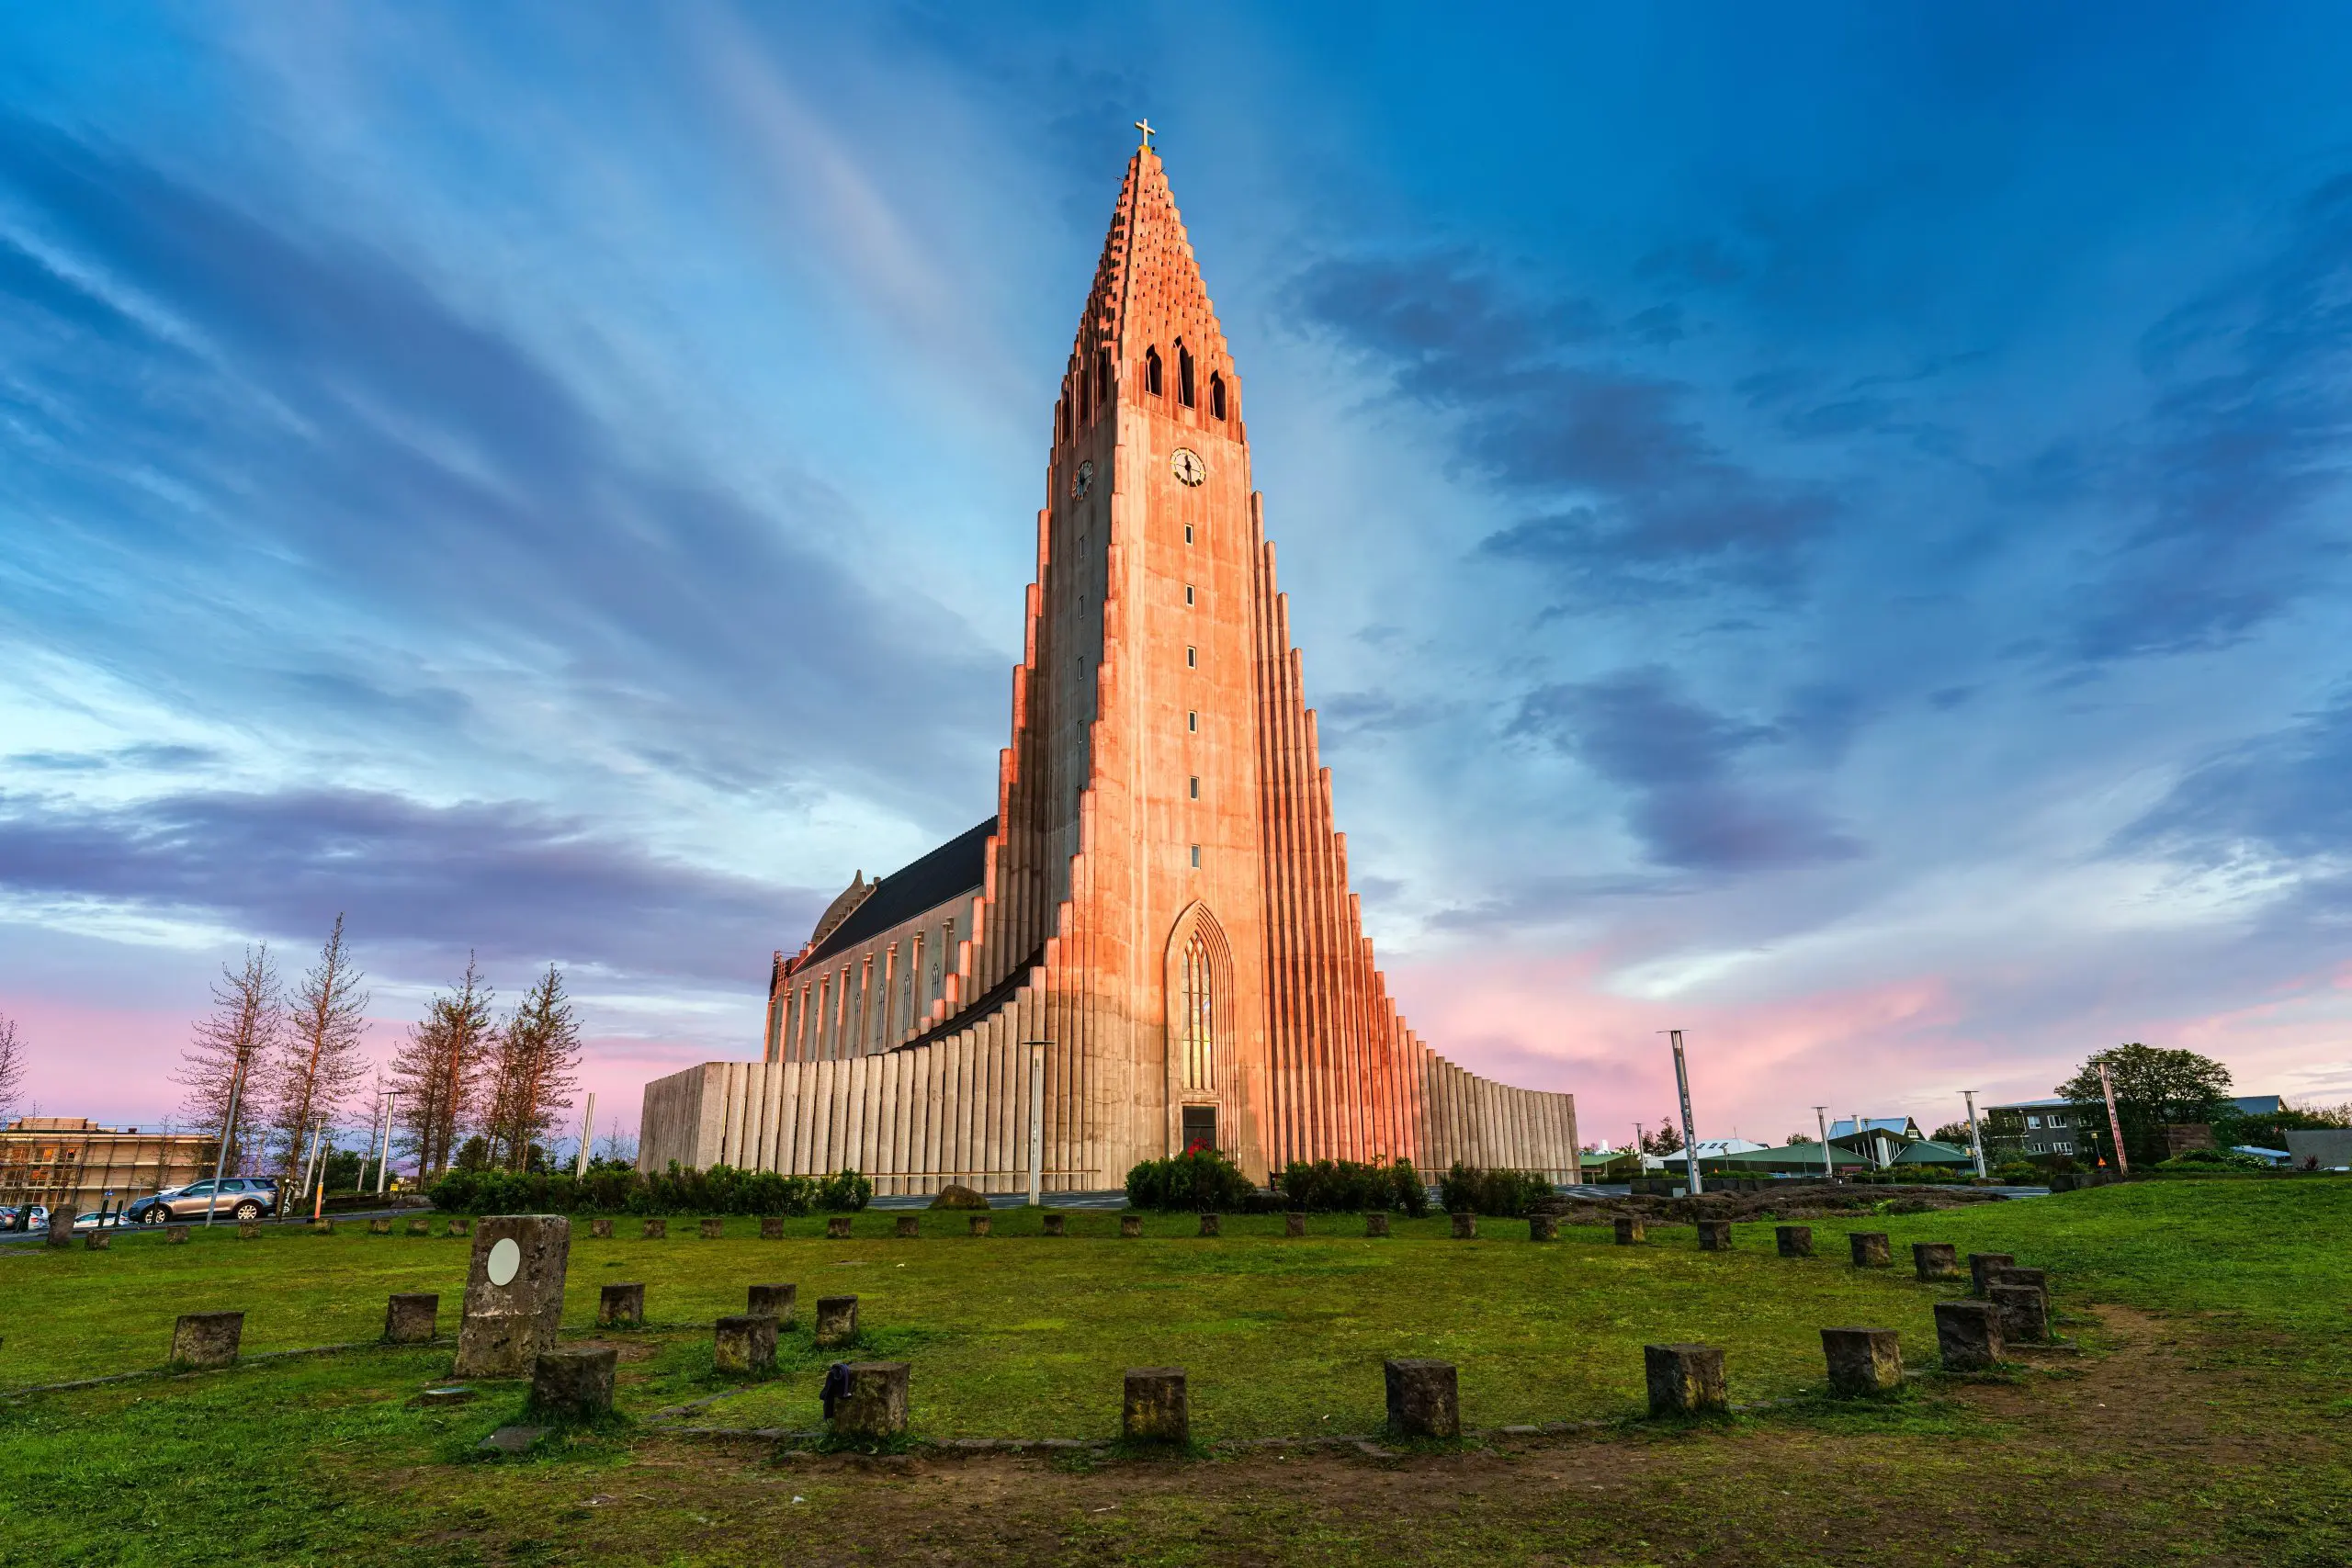 Plan A Day Trip to Reykjavik The Scenic Icelandic Capital